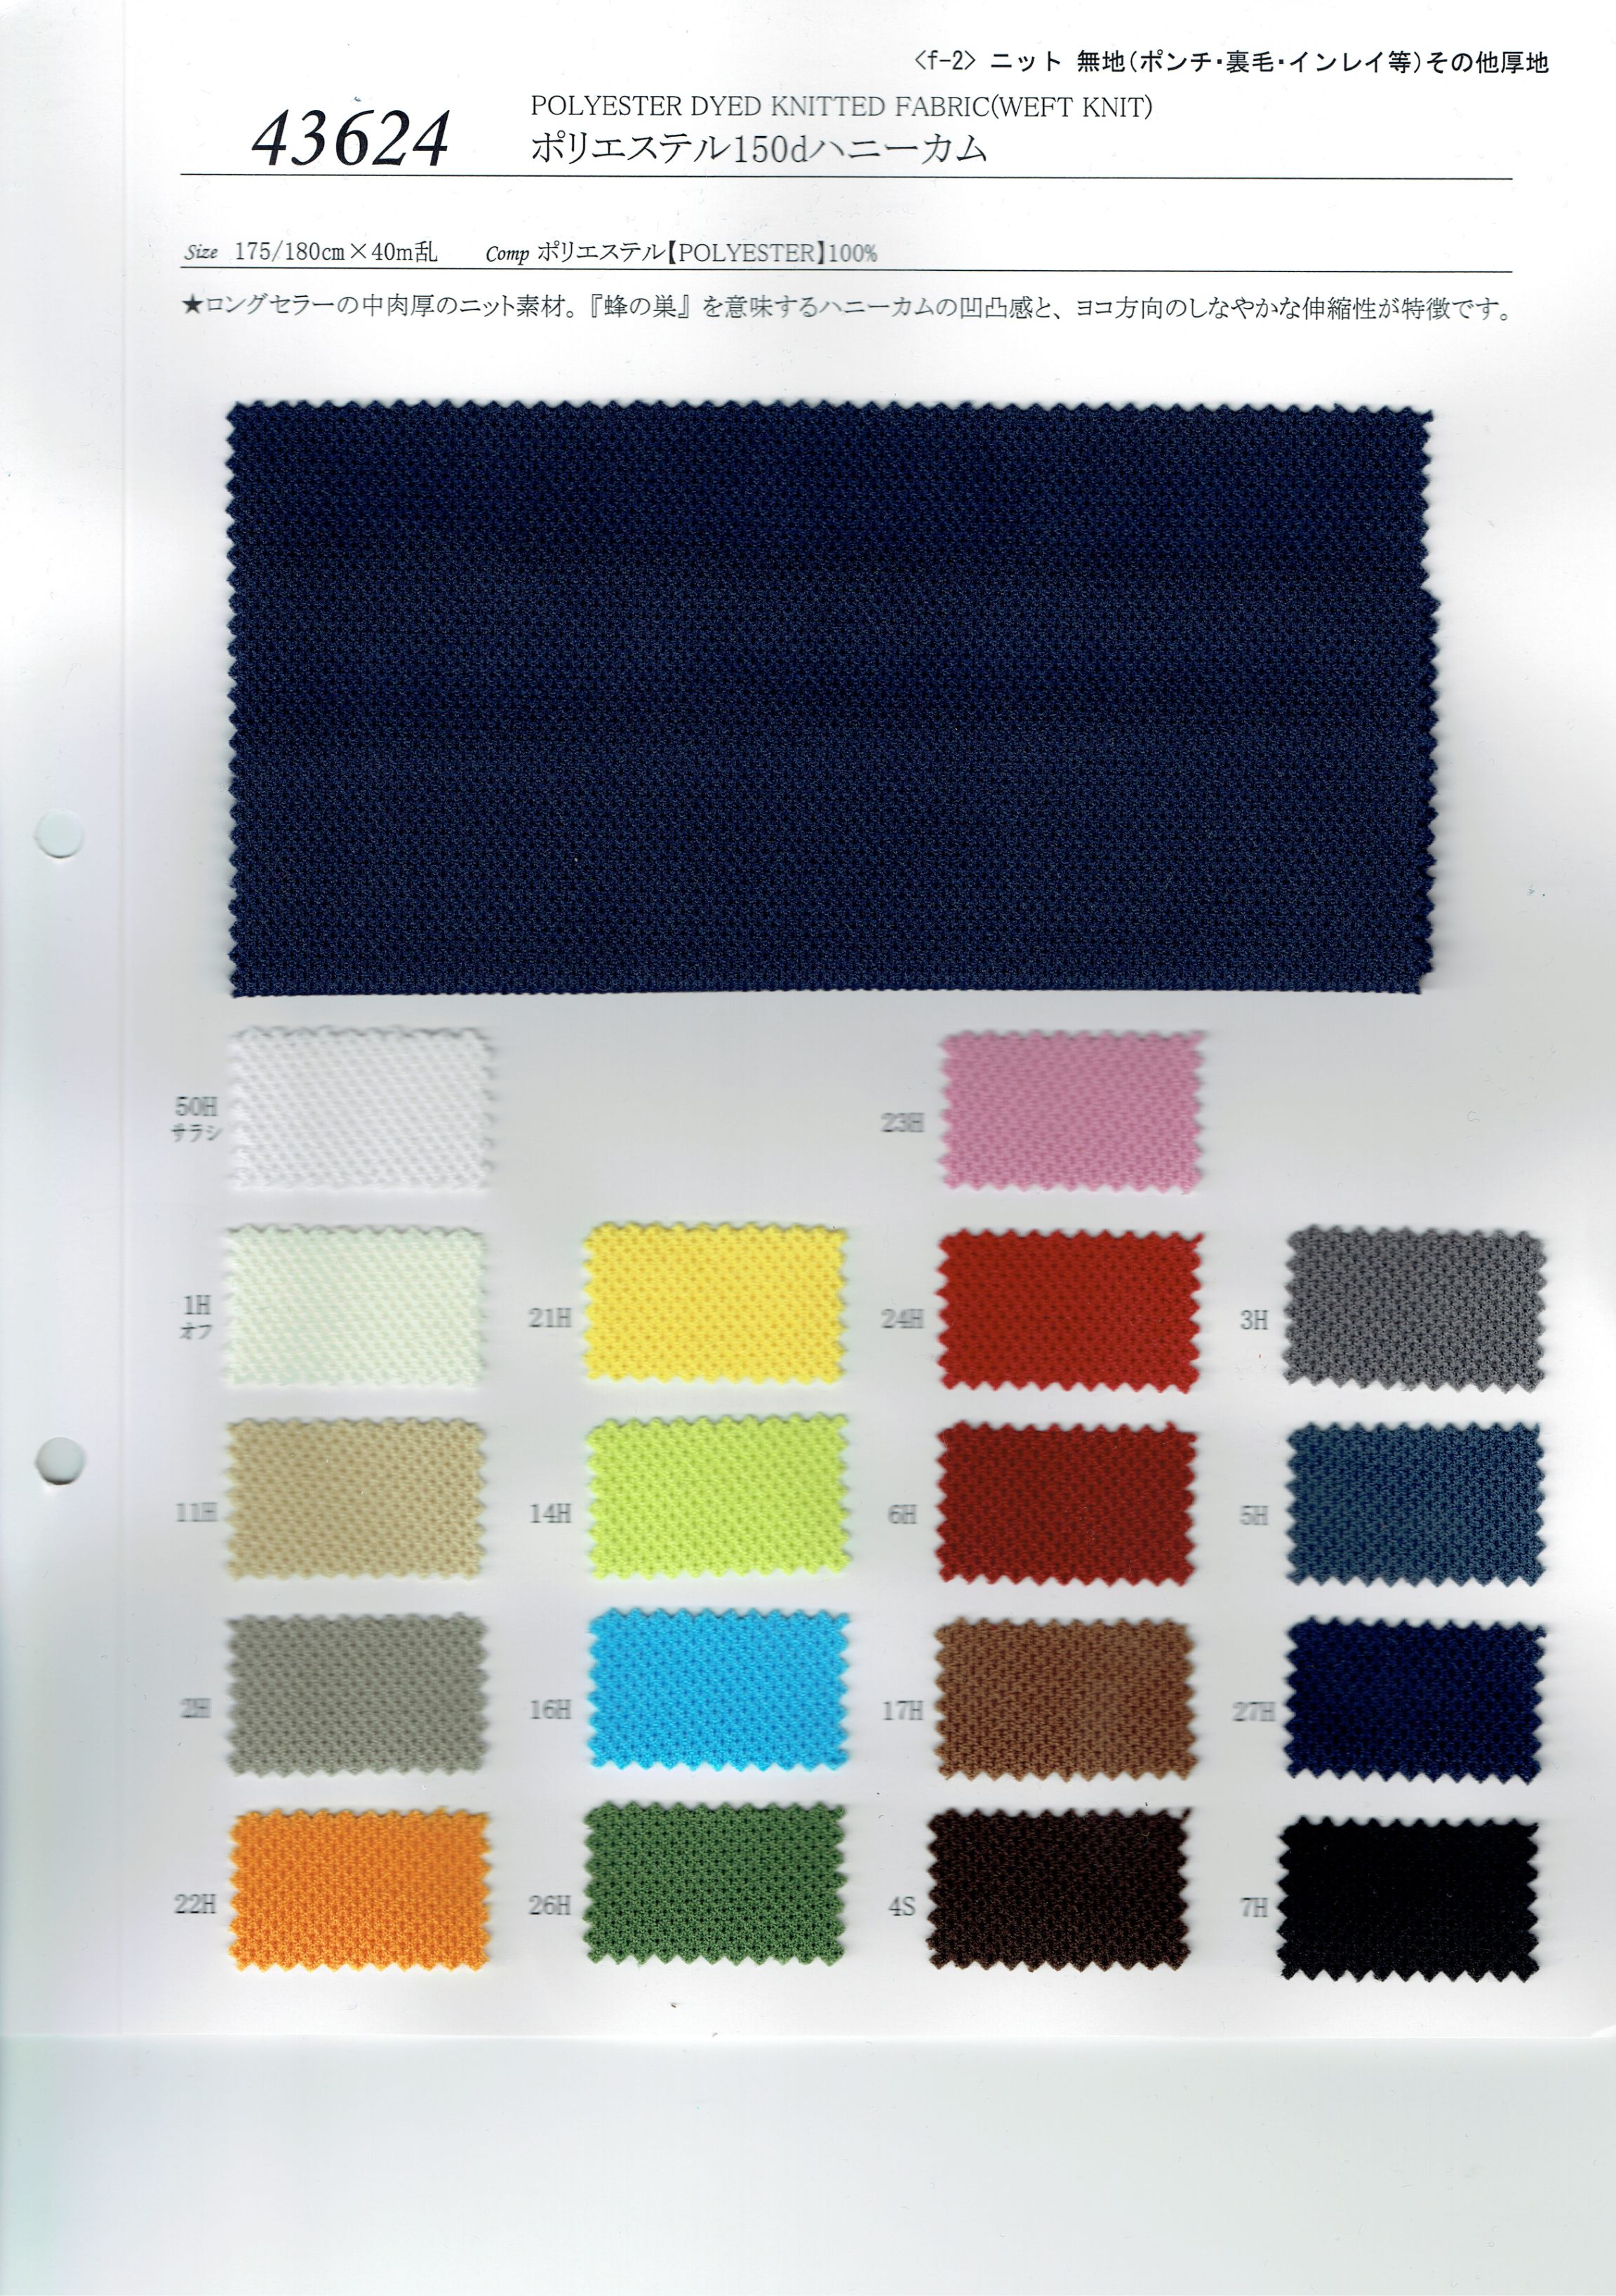 View POLYESTER100 DYED KNITTED FABRIC[WEFT KNIT] DYED KNITTED FABRIC[WEFT KNIT]